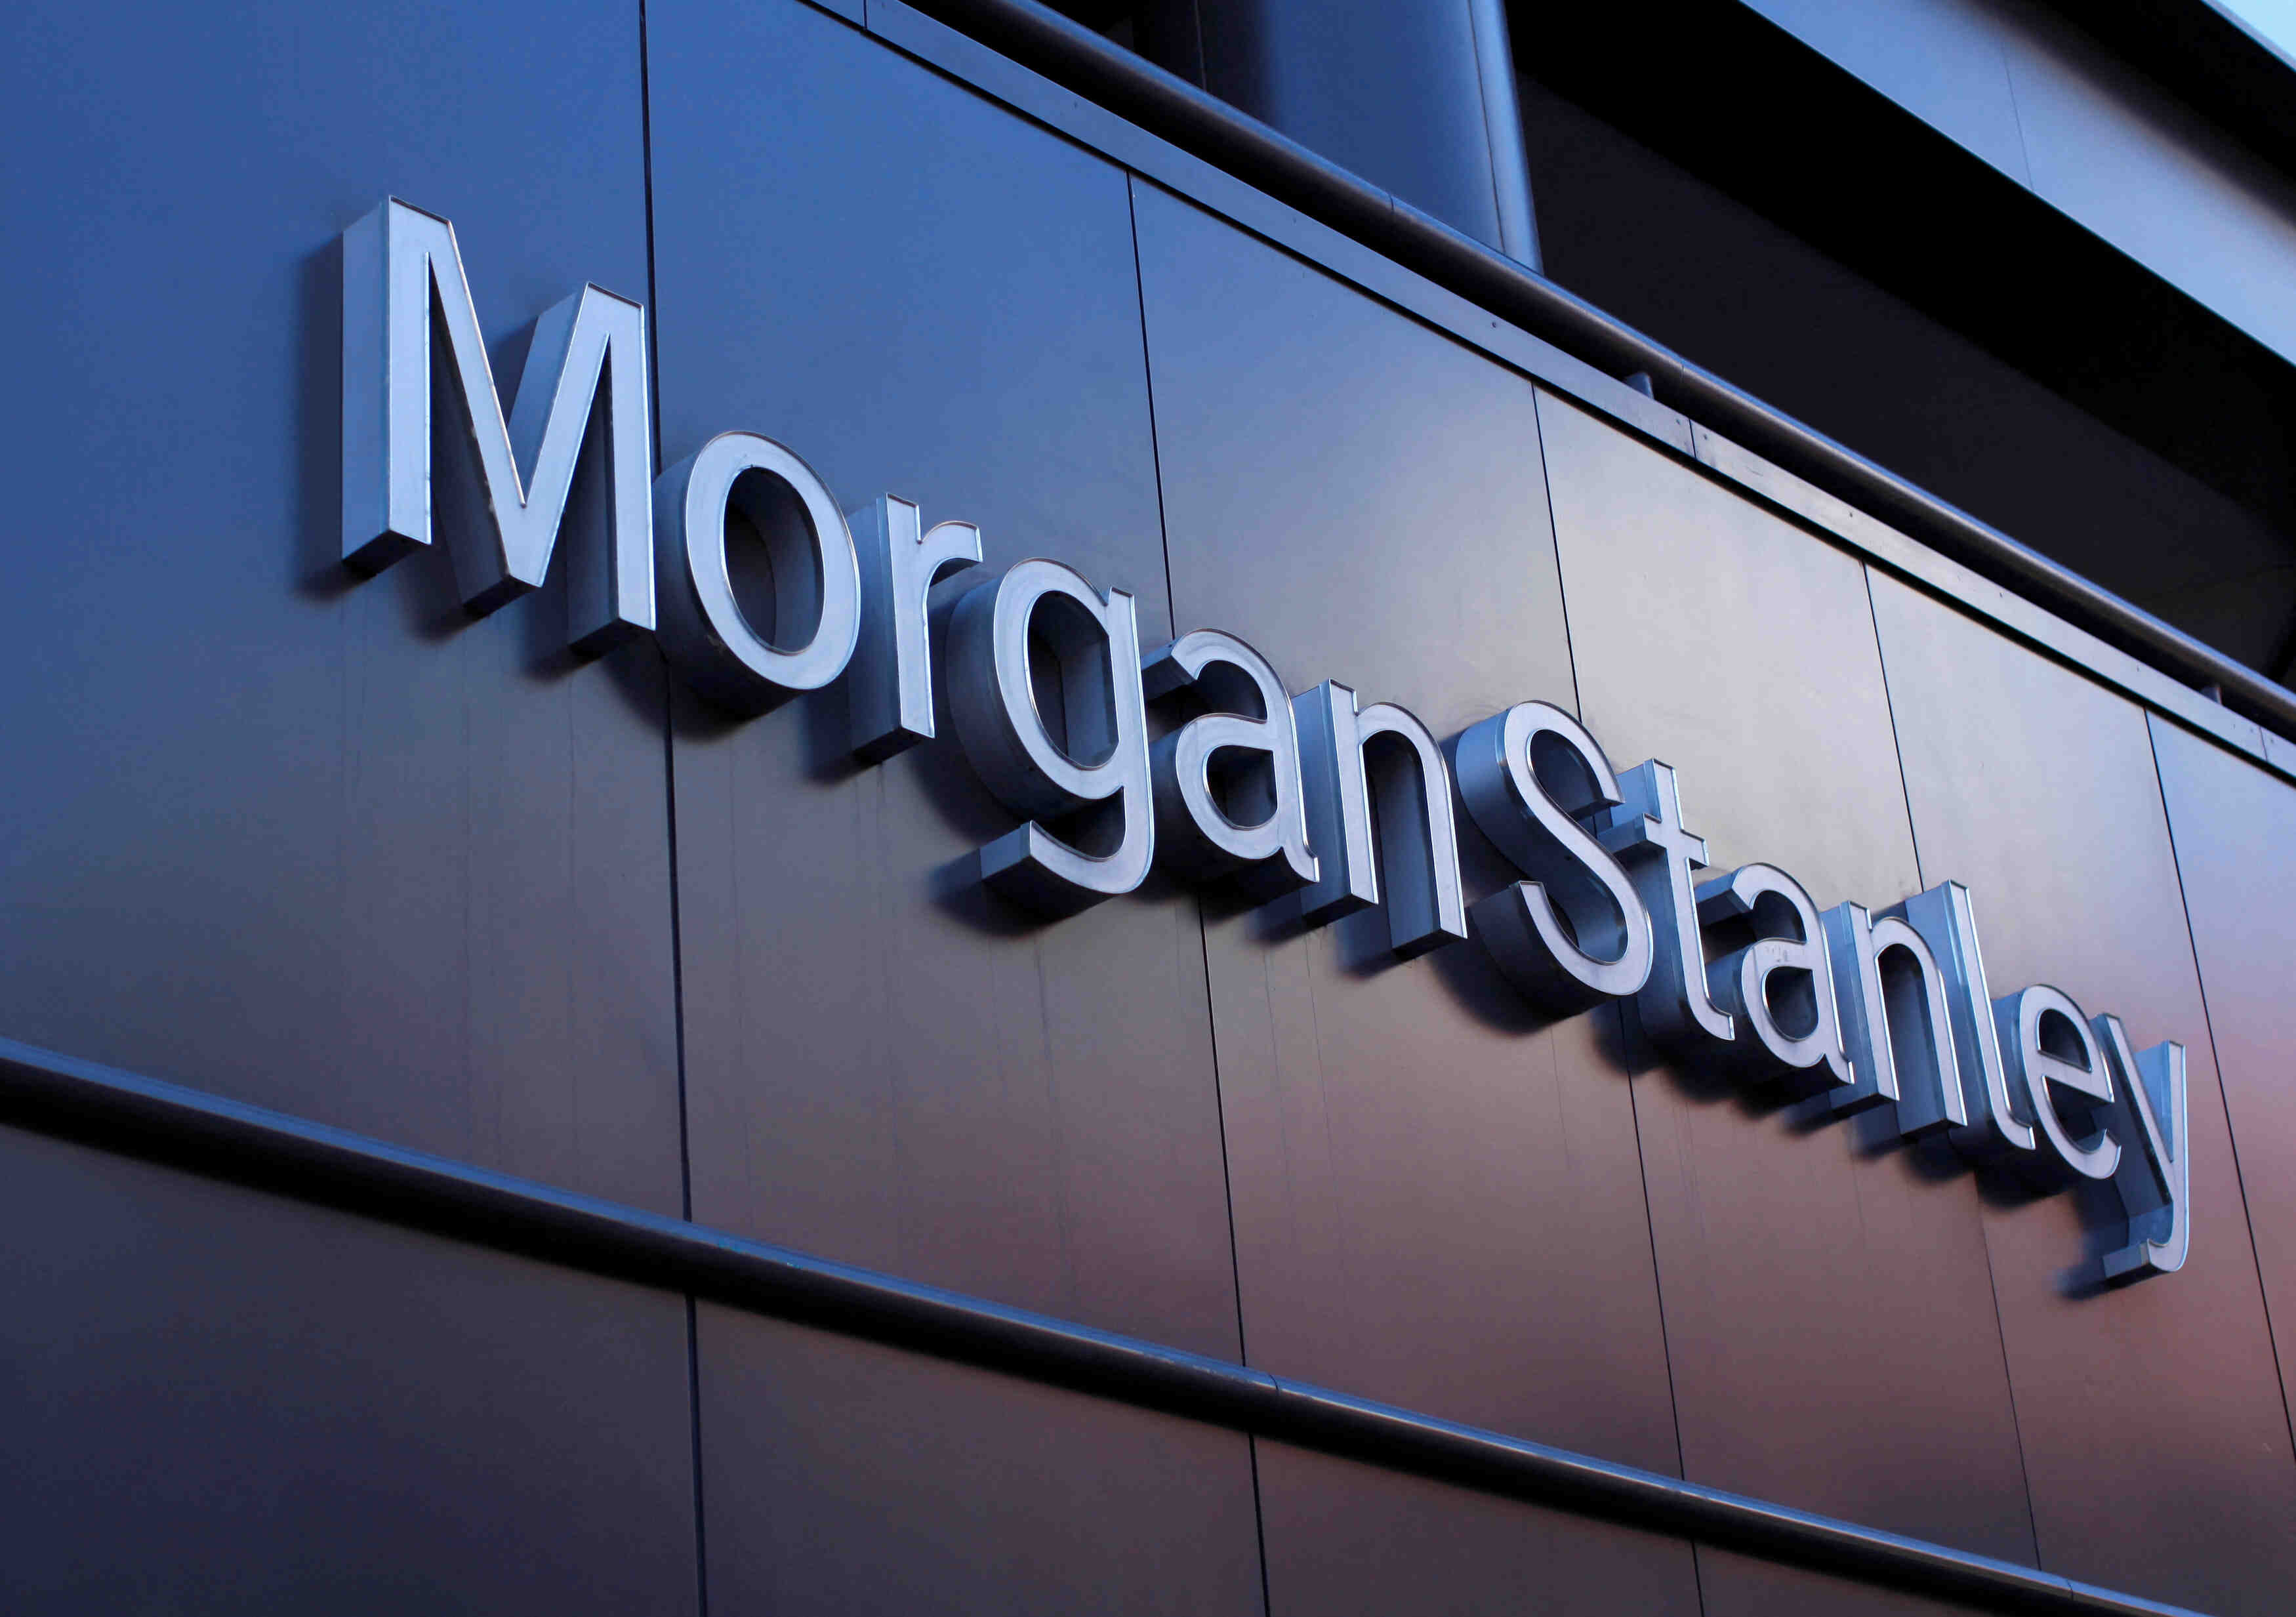 https://facts.net/wp-content/uploads/2023/09/20-facts-about-morgan-stanley-1695740203.jpg